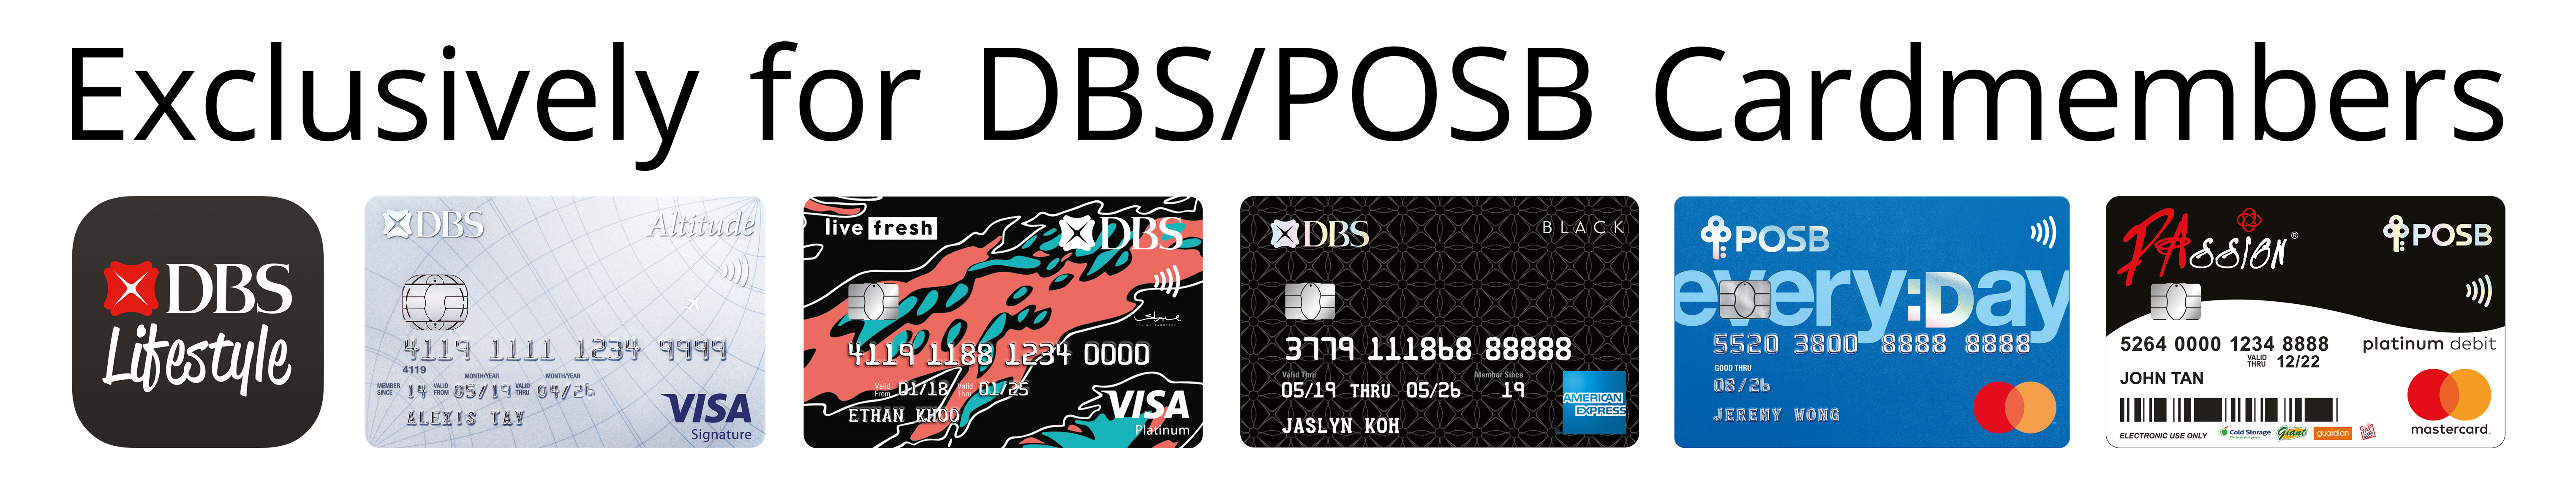 dbs-posb-cards-promotion-post